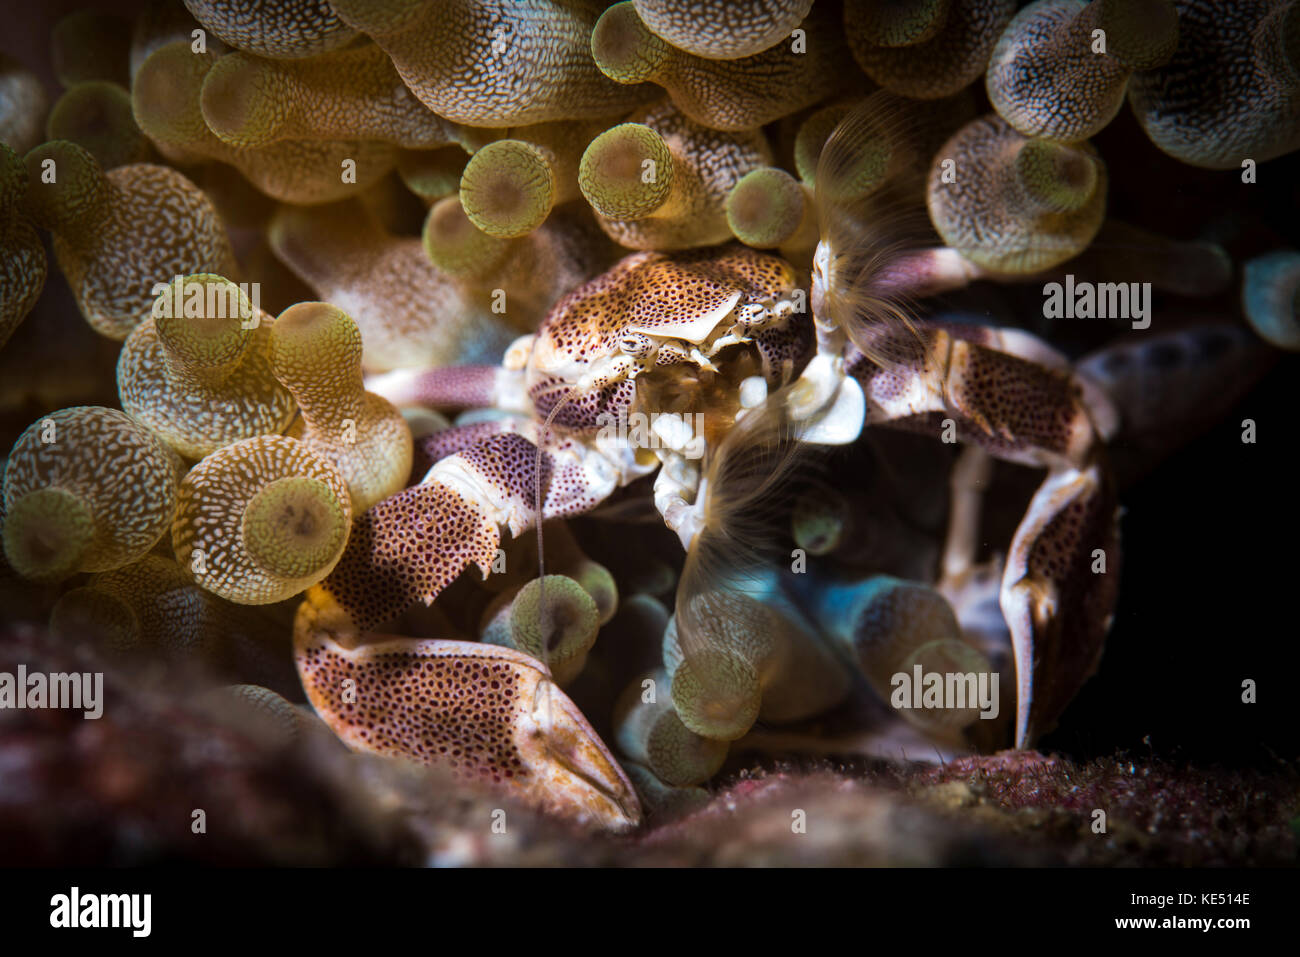 A porcelain crab catching tiny food particles with it's feather-like appendages. Stock Photo